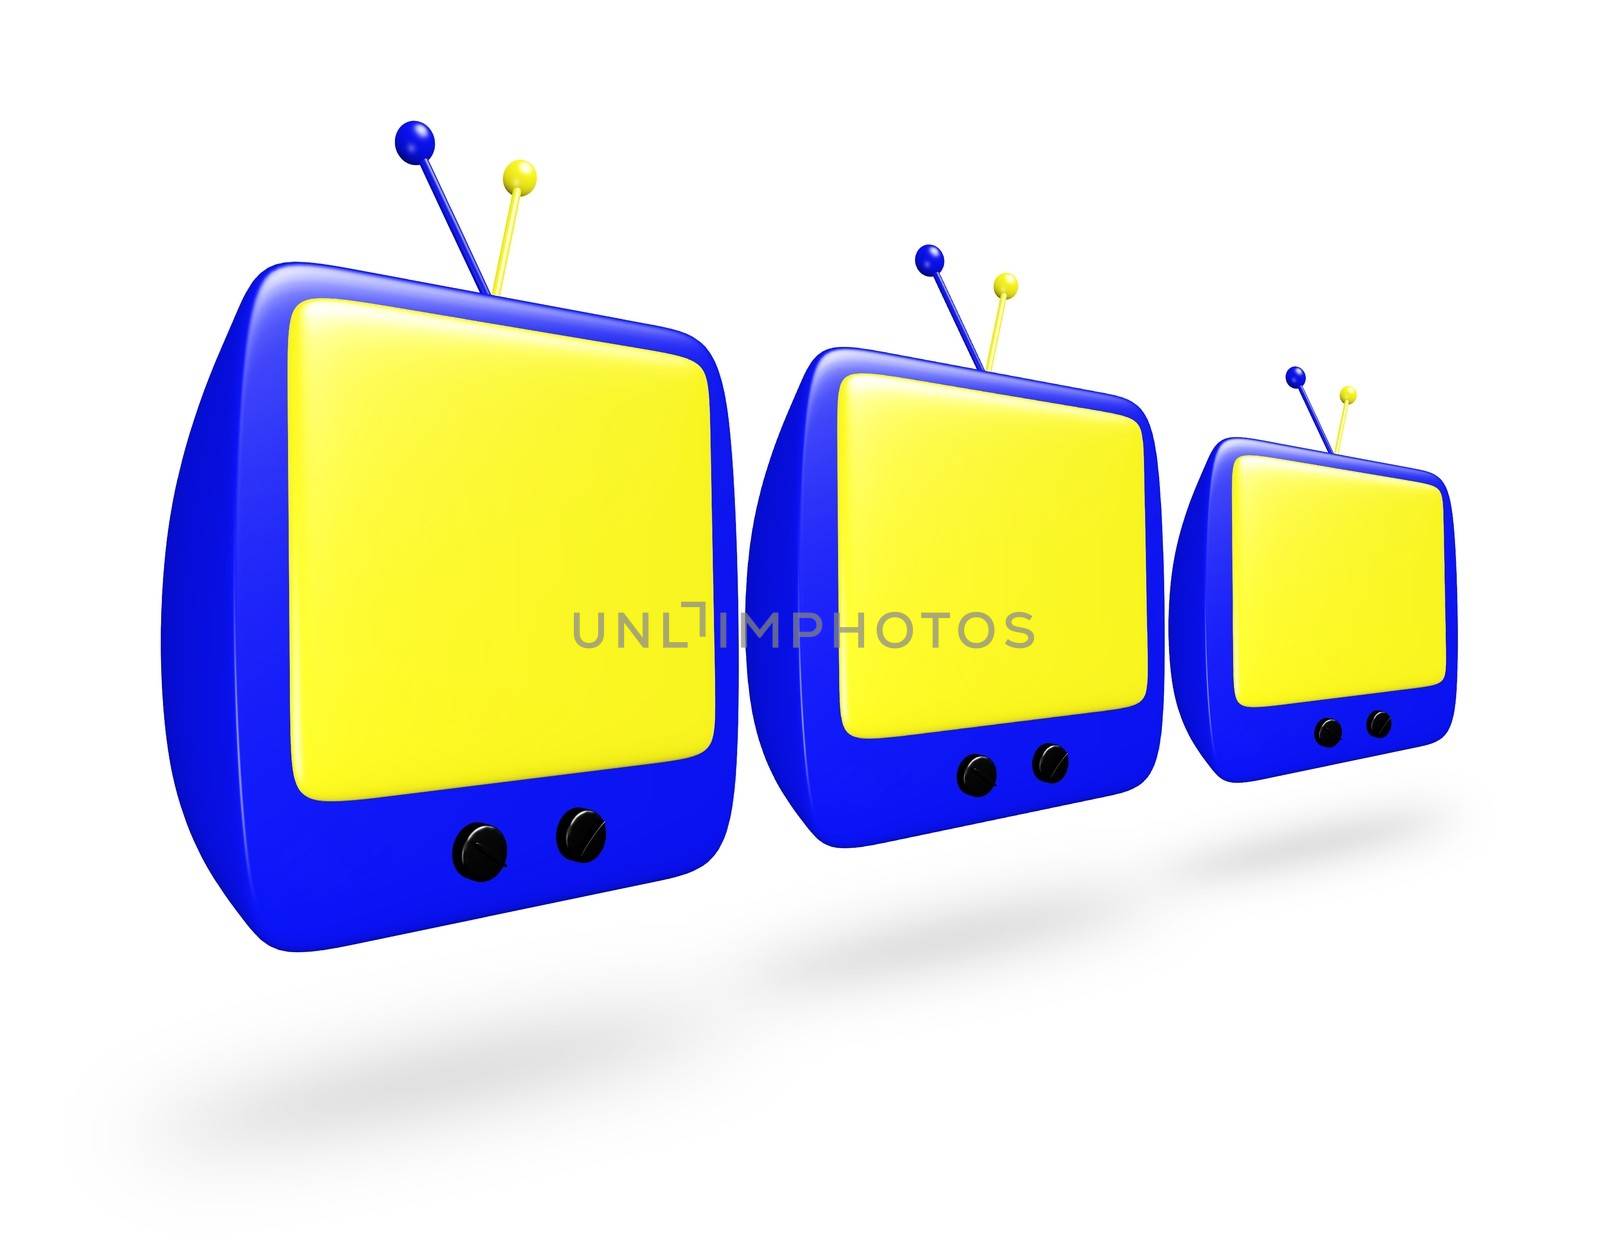 Three 3D blue cartoon TV with yellow screens in a row
